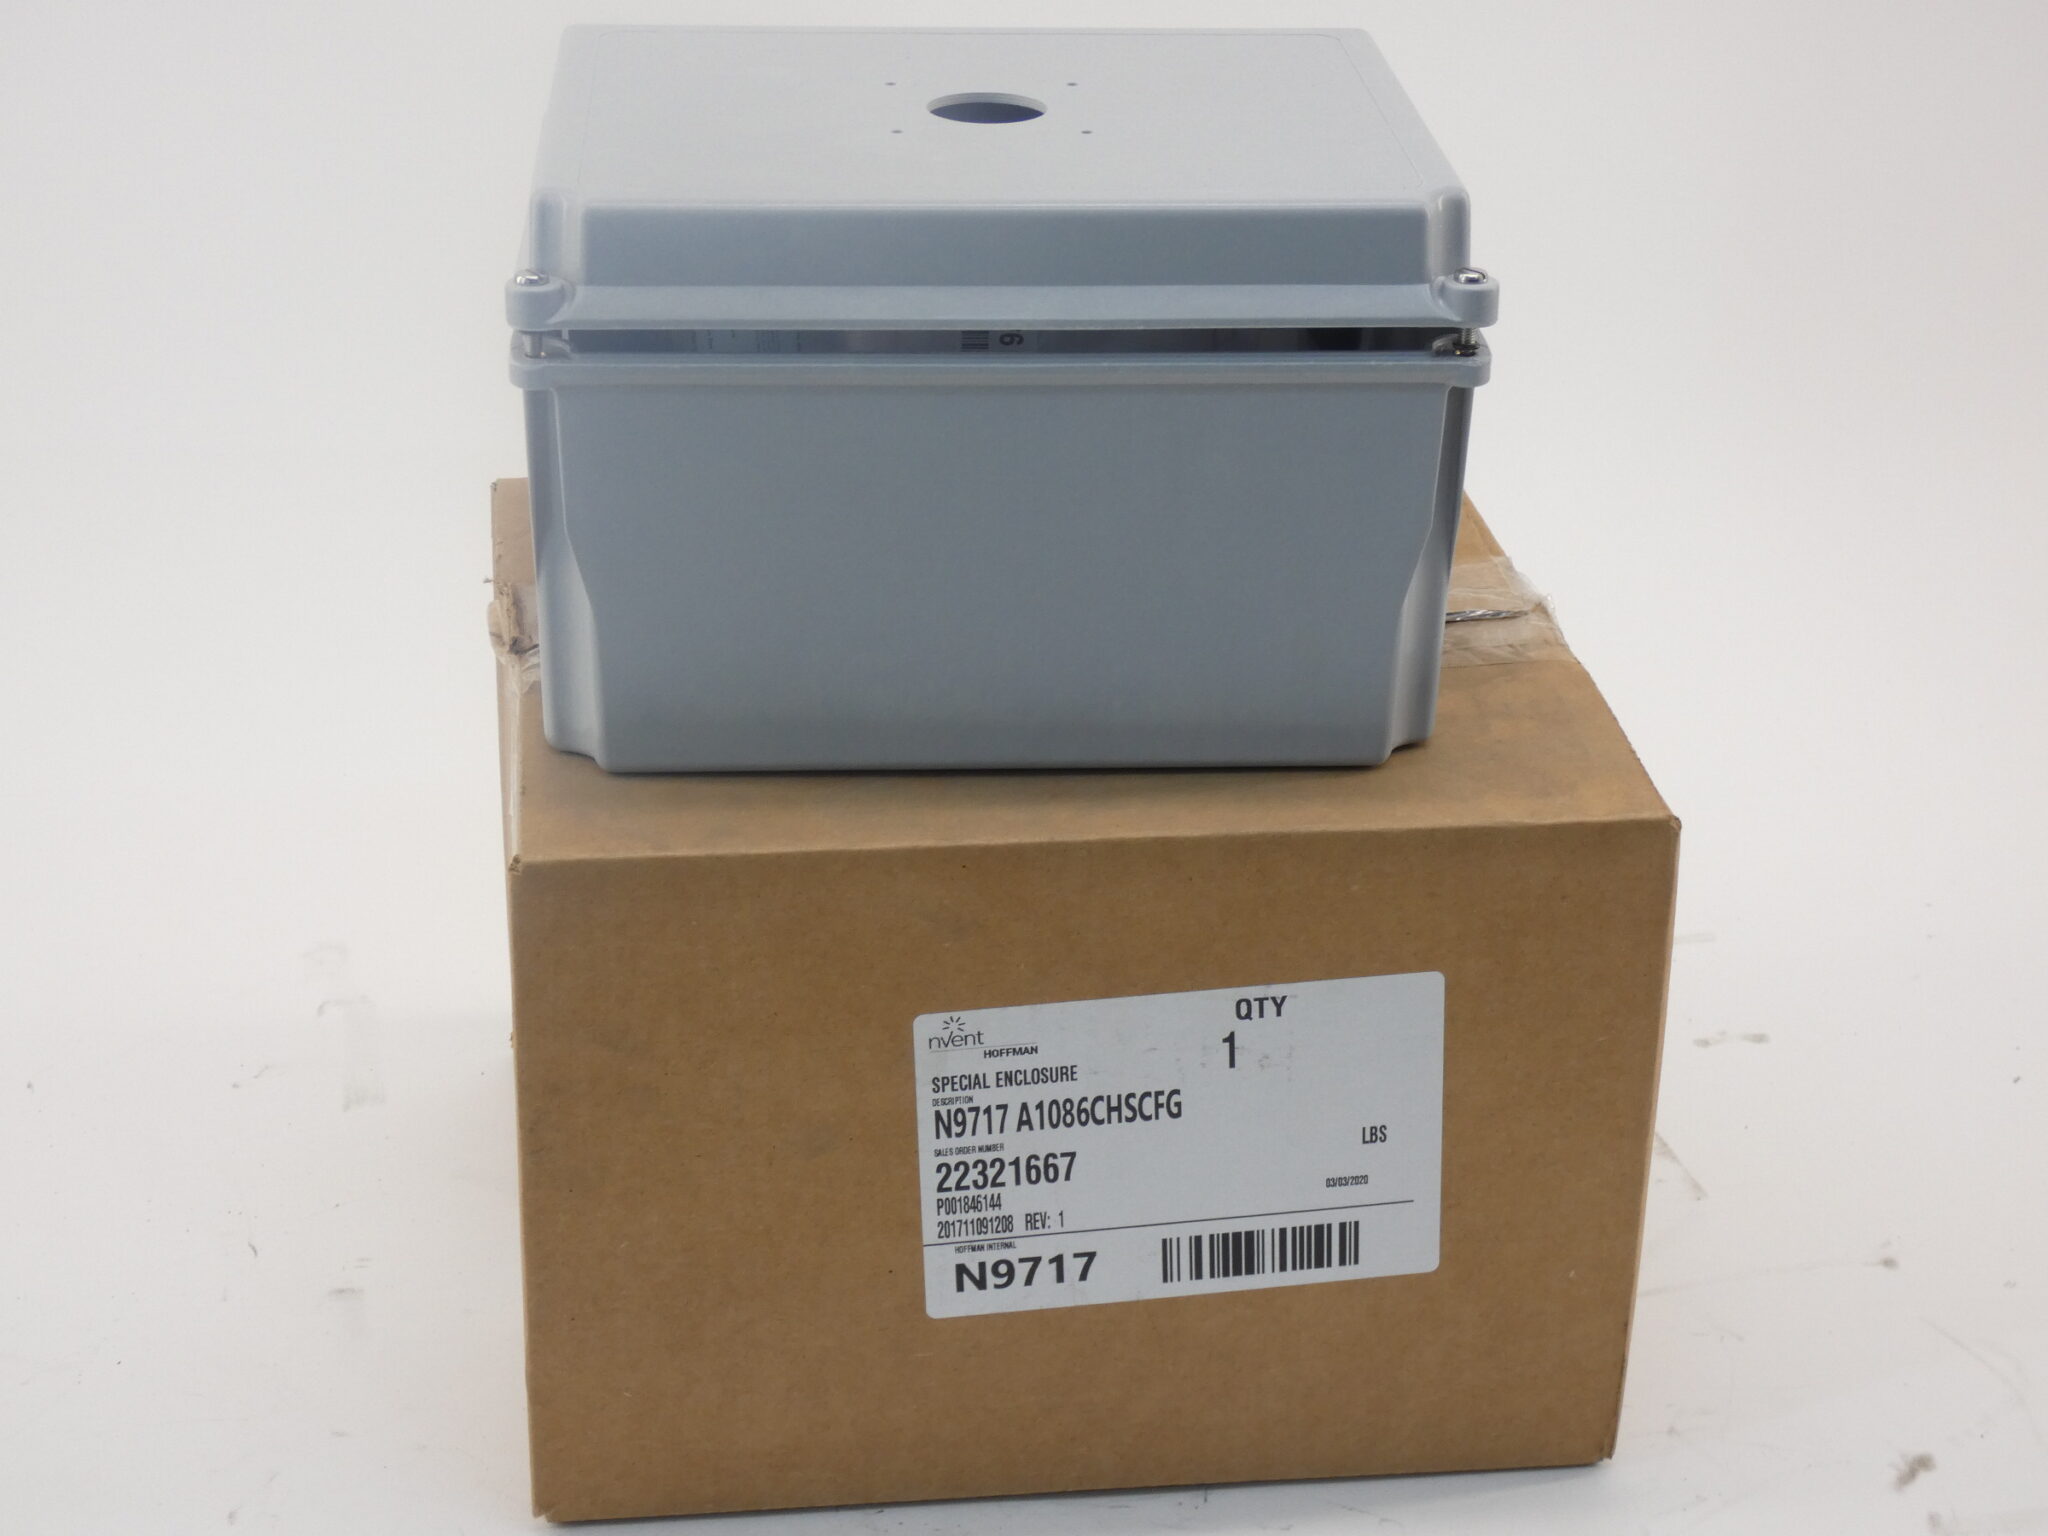 Hoffman nVent A1086CHSCFG Industrial Control Panel Enclosure 10"x8"x6" - NEW ...